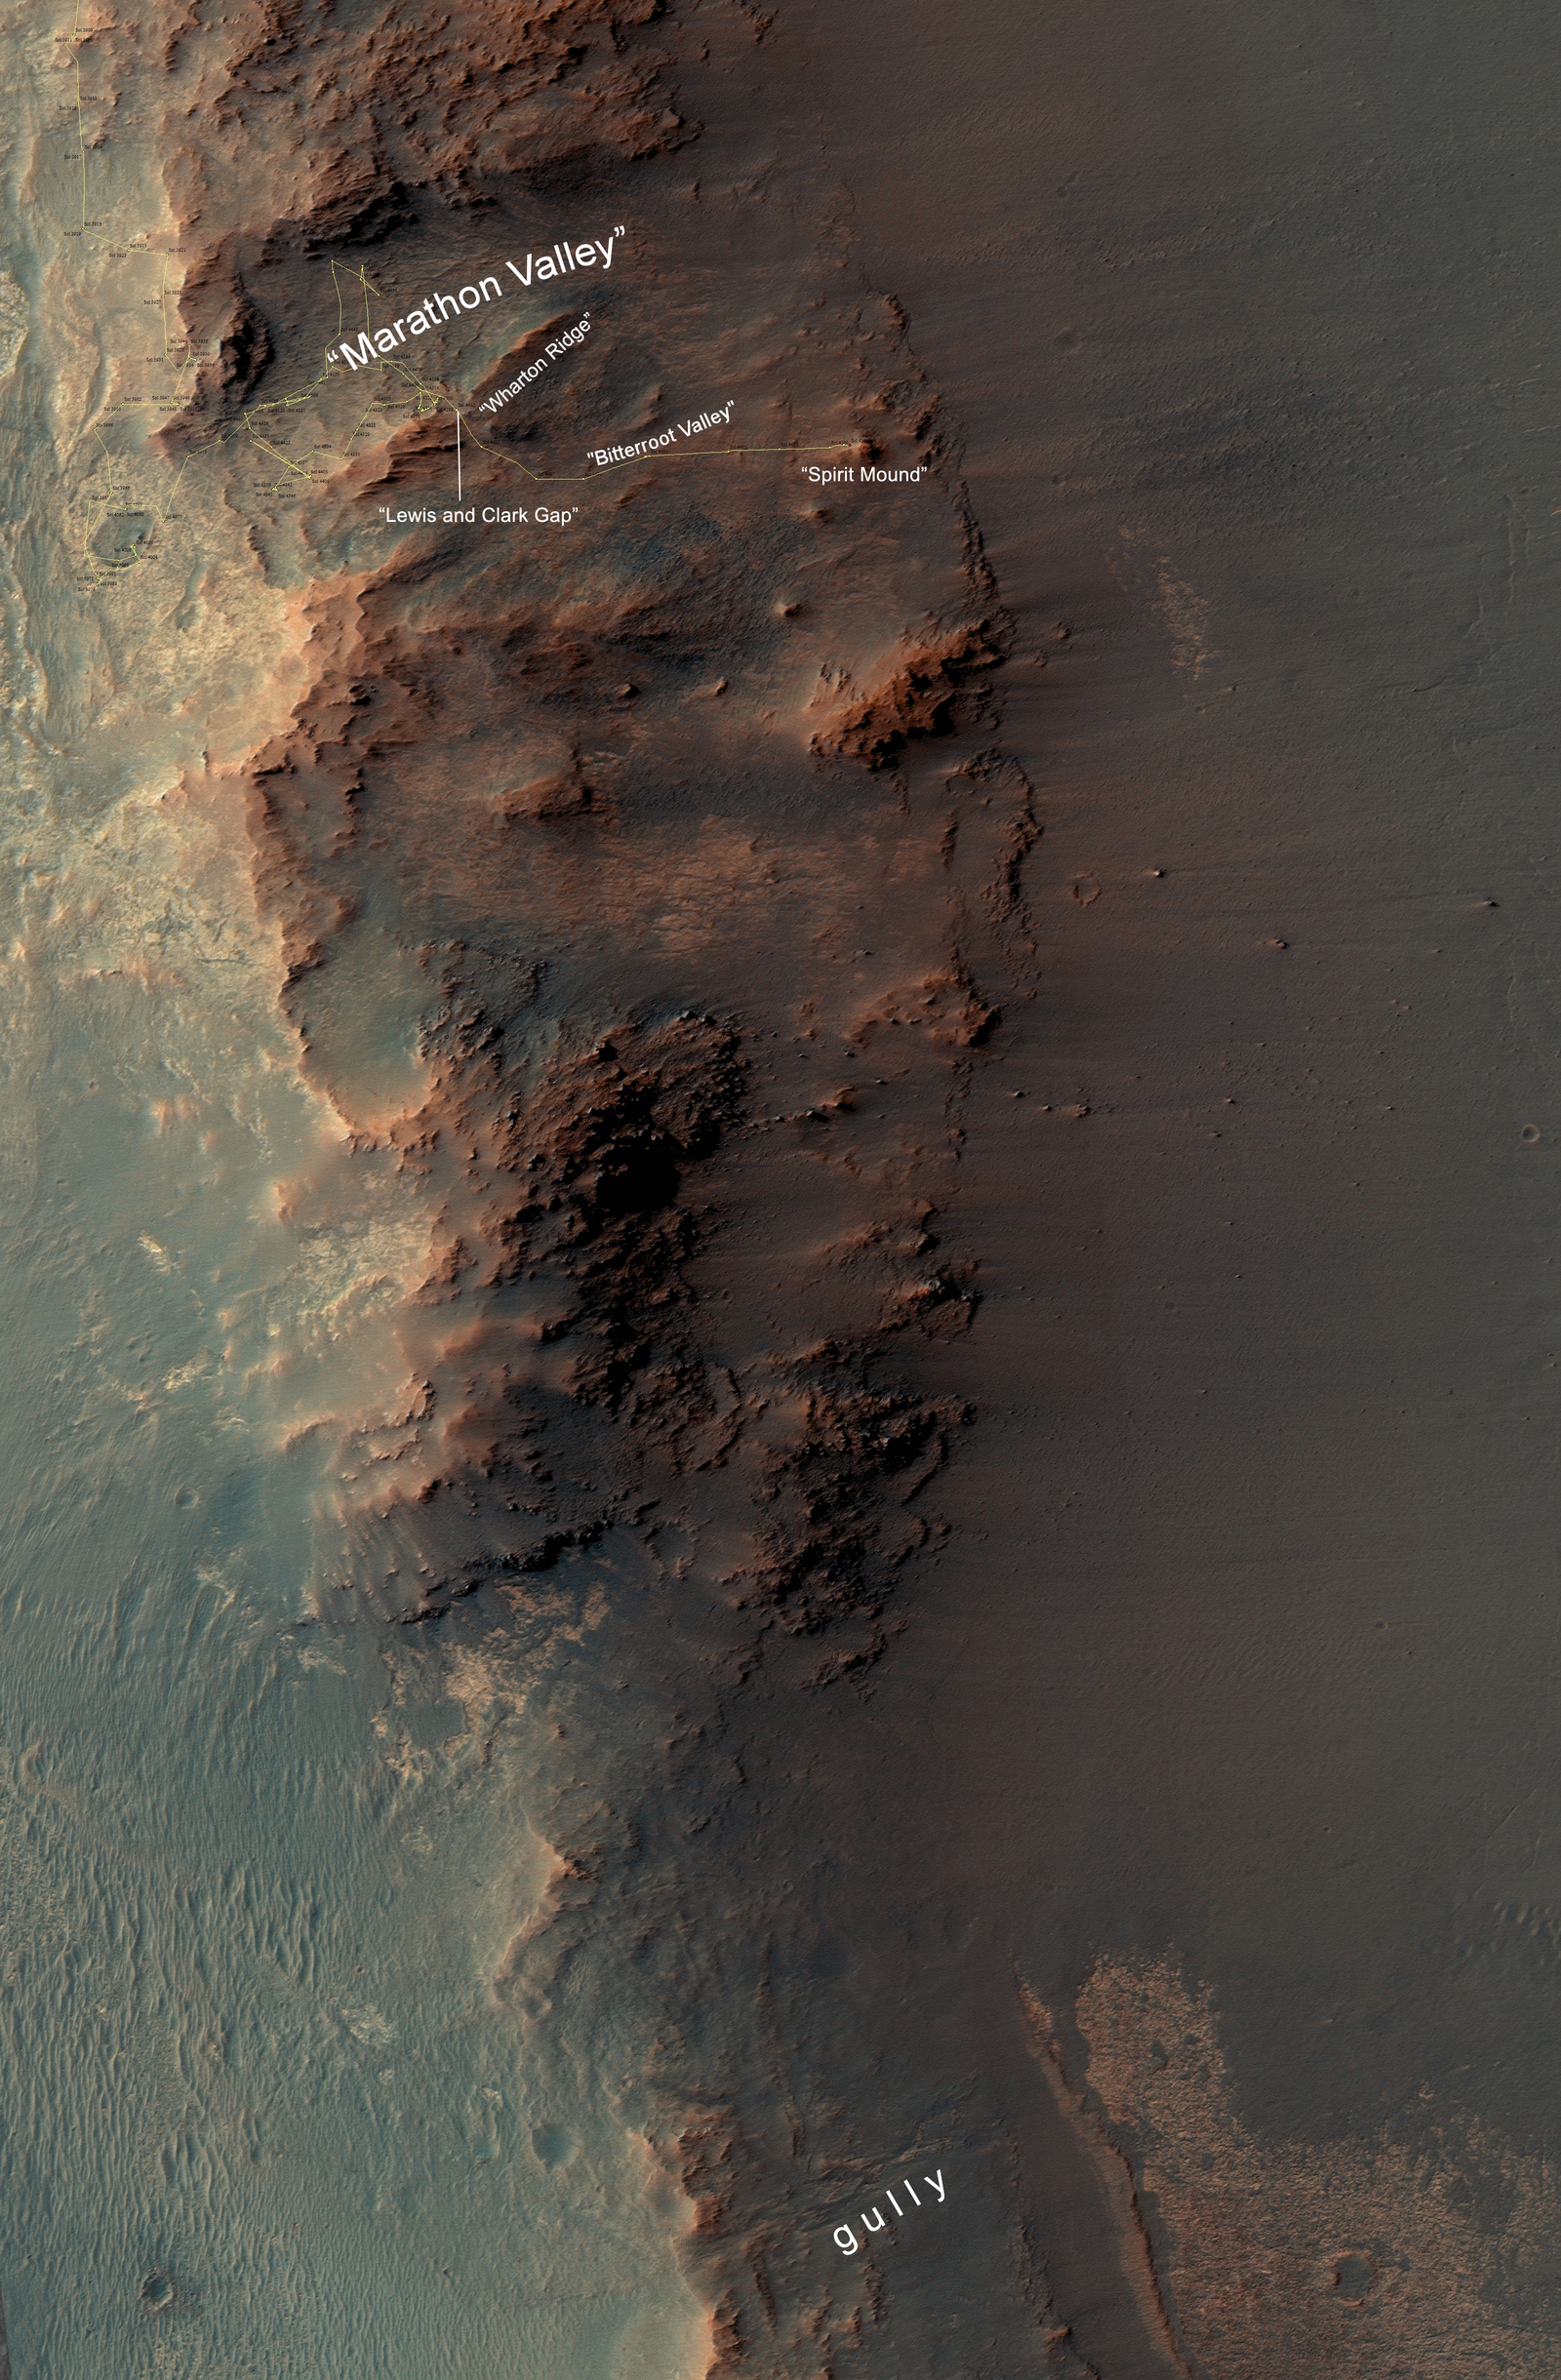 This map show a portion of Endeavour Crater's western rim that includes the "Marathon Valley" area investigated intensively by NASA's Mars Exploration Rover Opportunity in 2015 and 2016, and a fluid-carved gully that is a destination to the south for the mission.